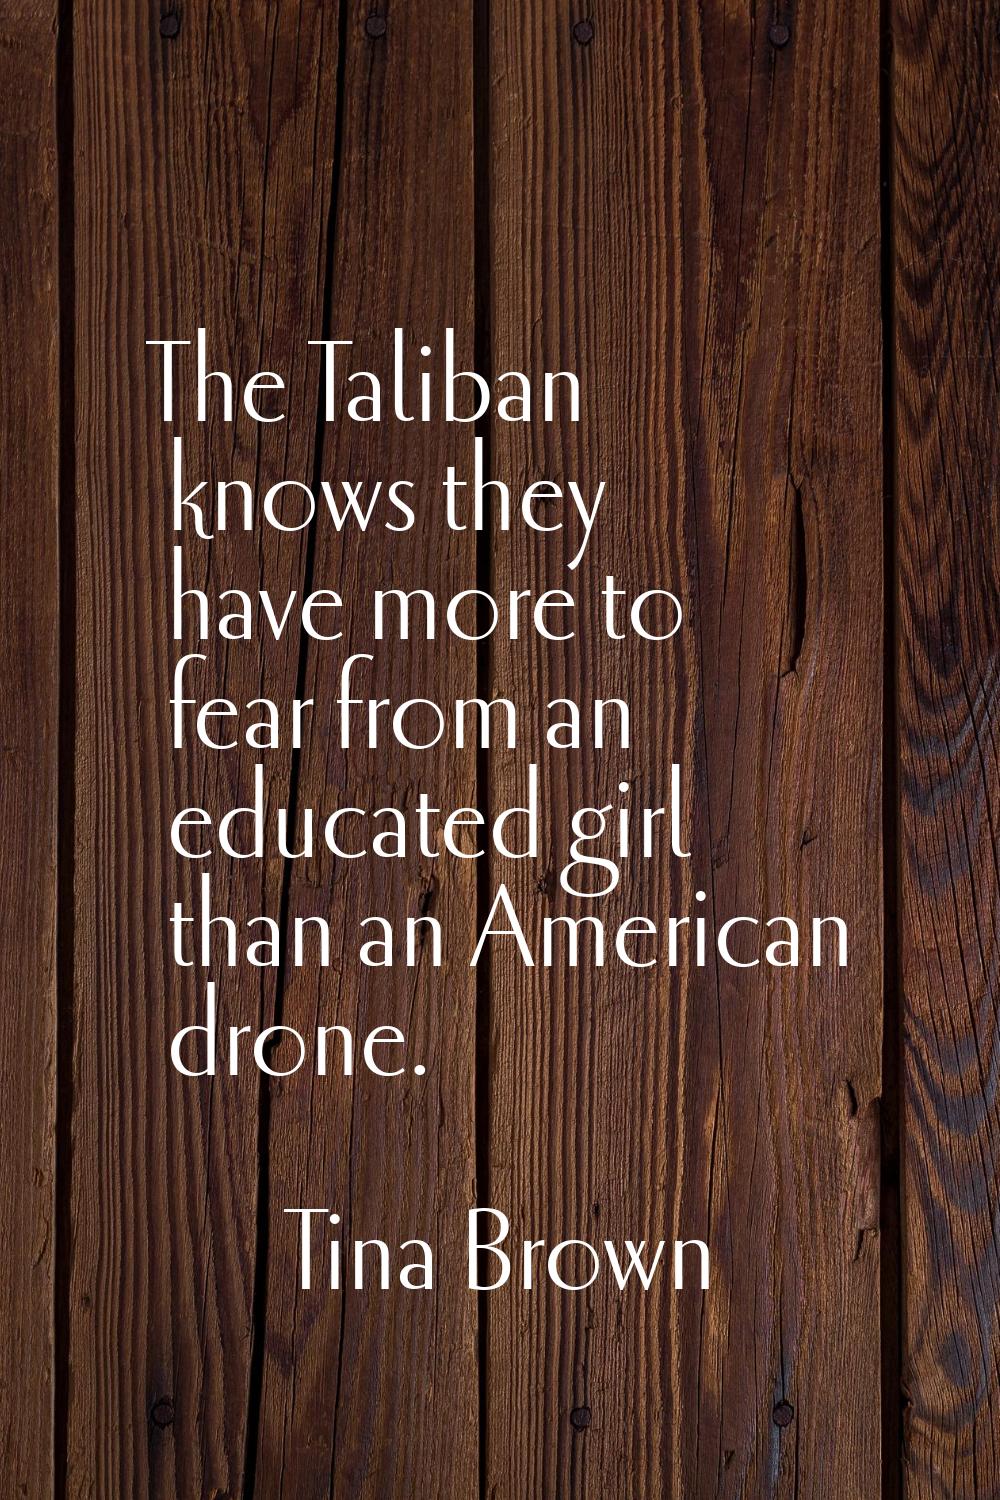 The Taliban knows they have more to fear from an educated girl than an American drone.